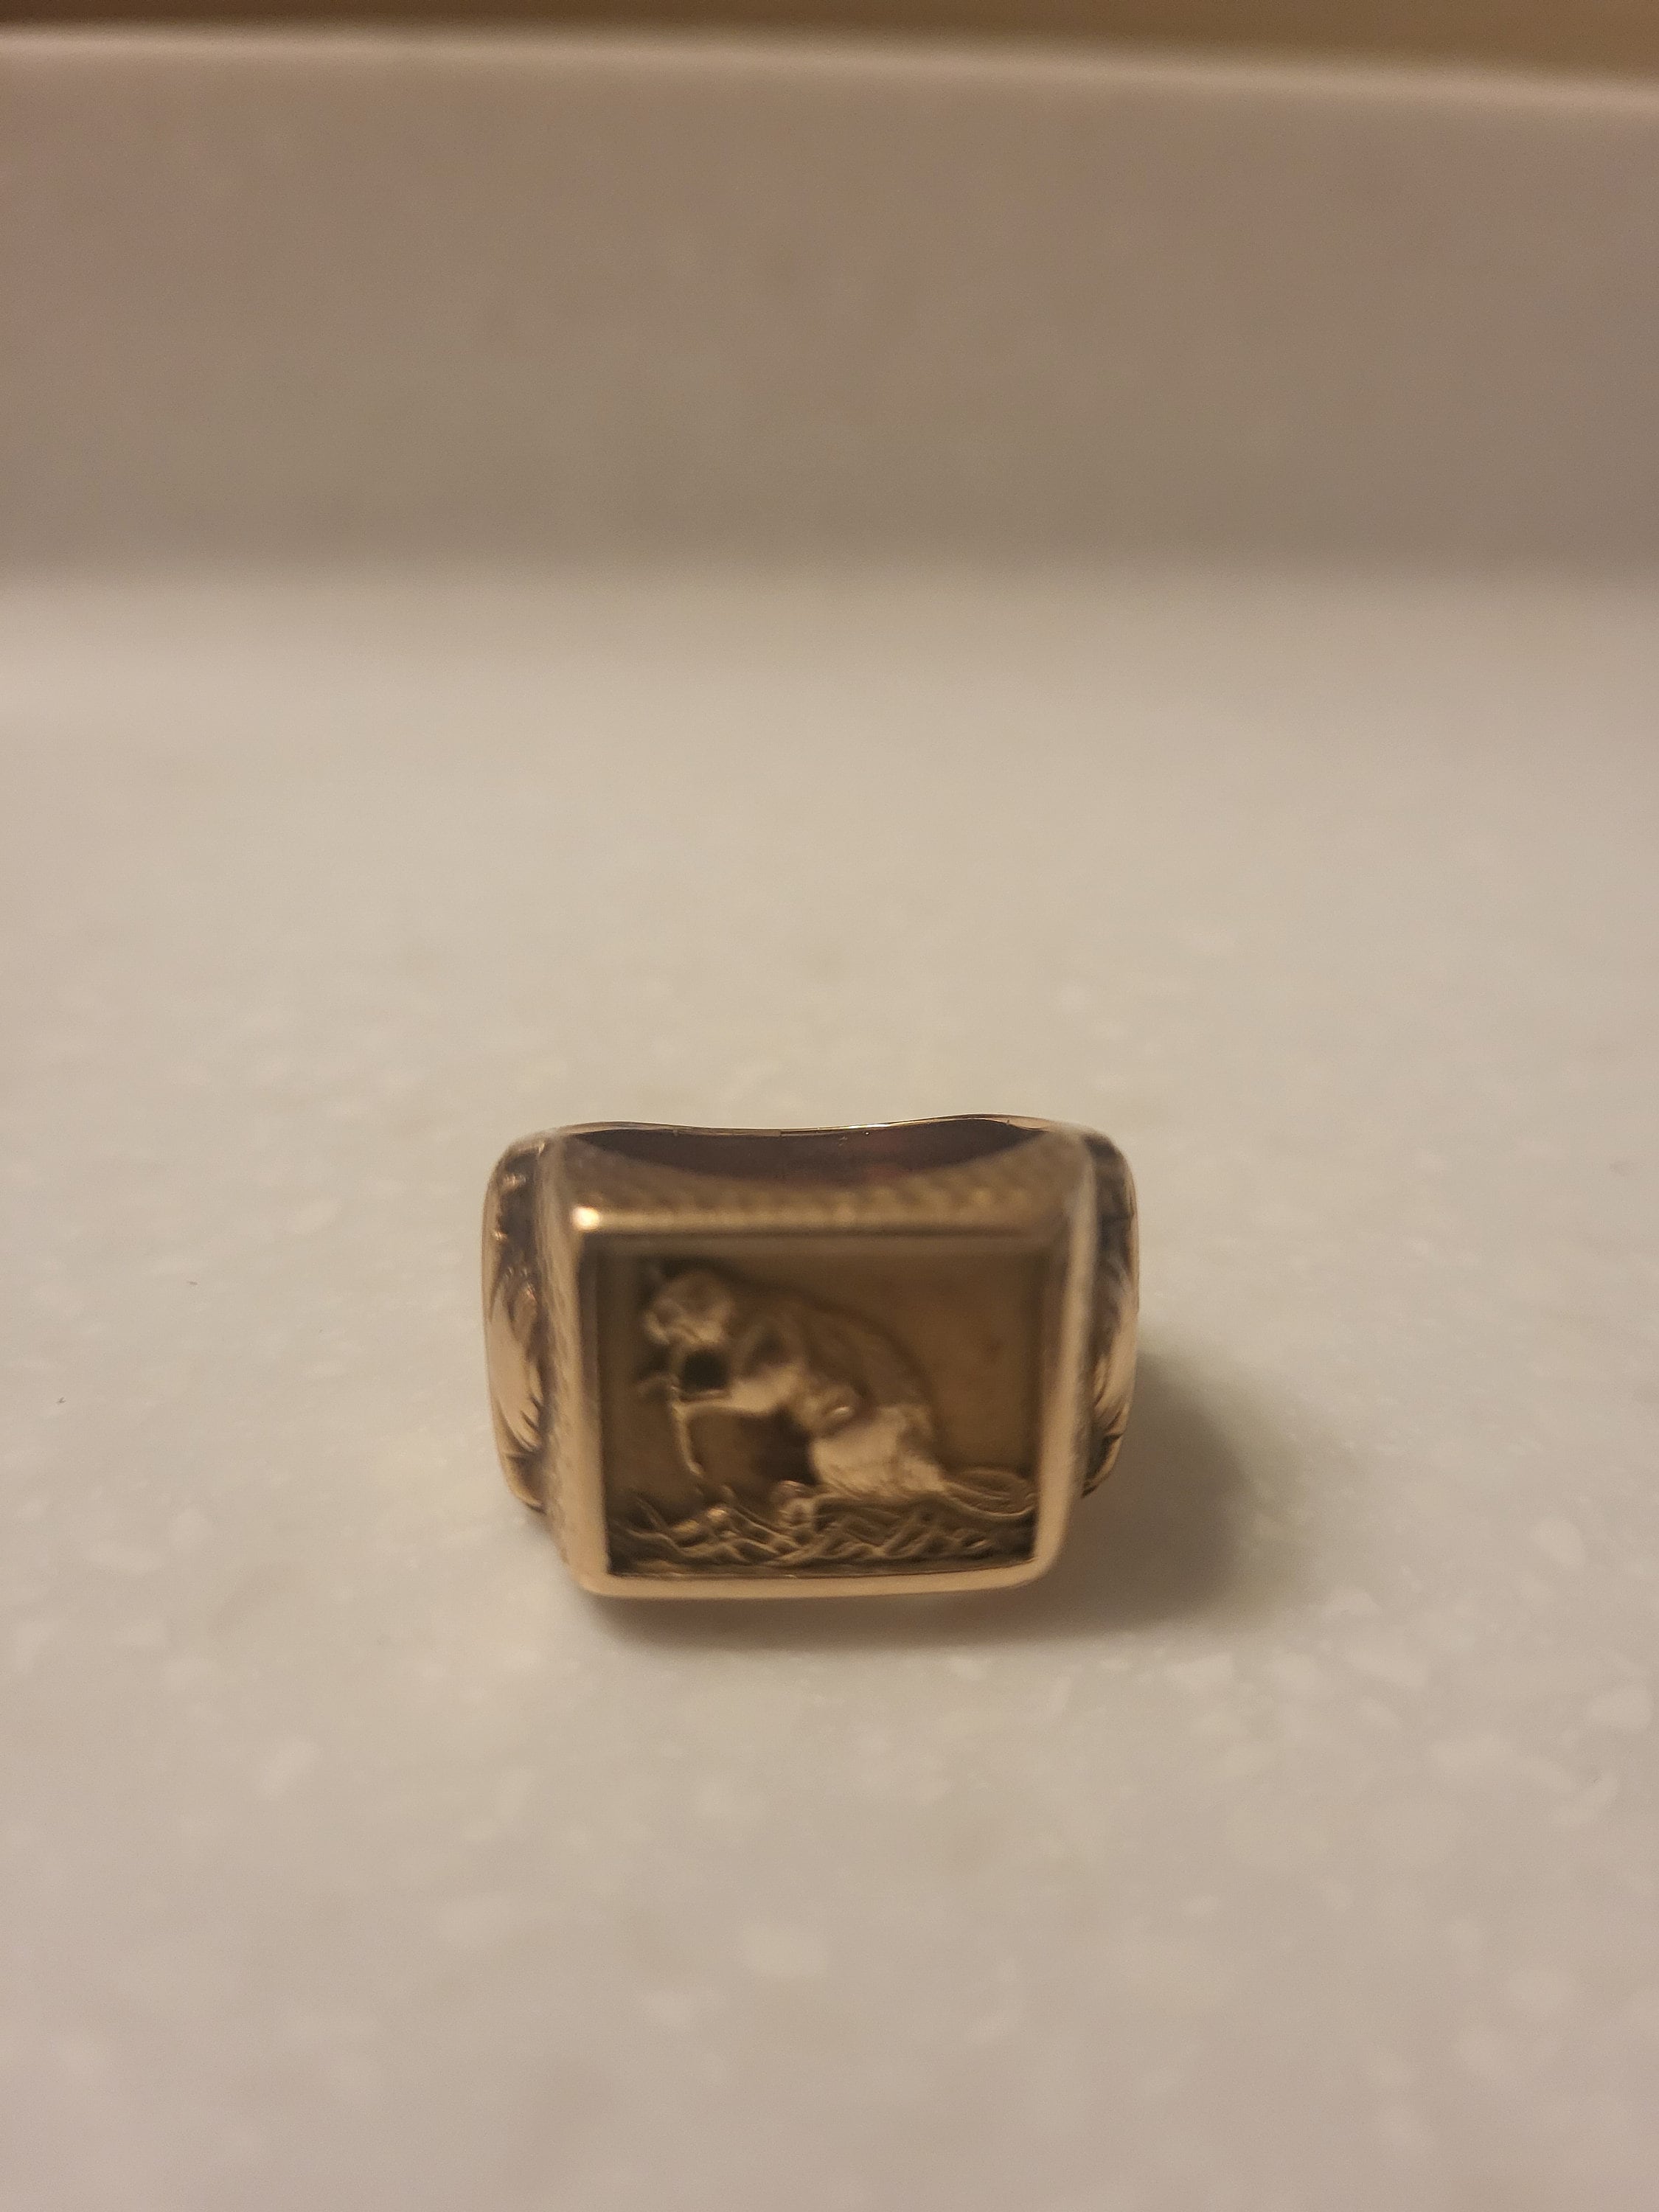 Solid 14K Gold MIT Brass Rat Class Ring 1962 - Koblenz & Co. Antique &  Estate Jewelry